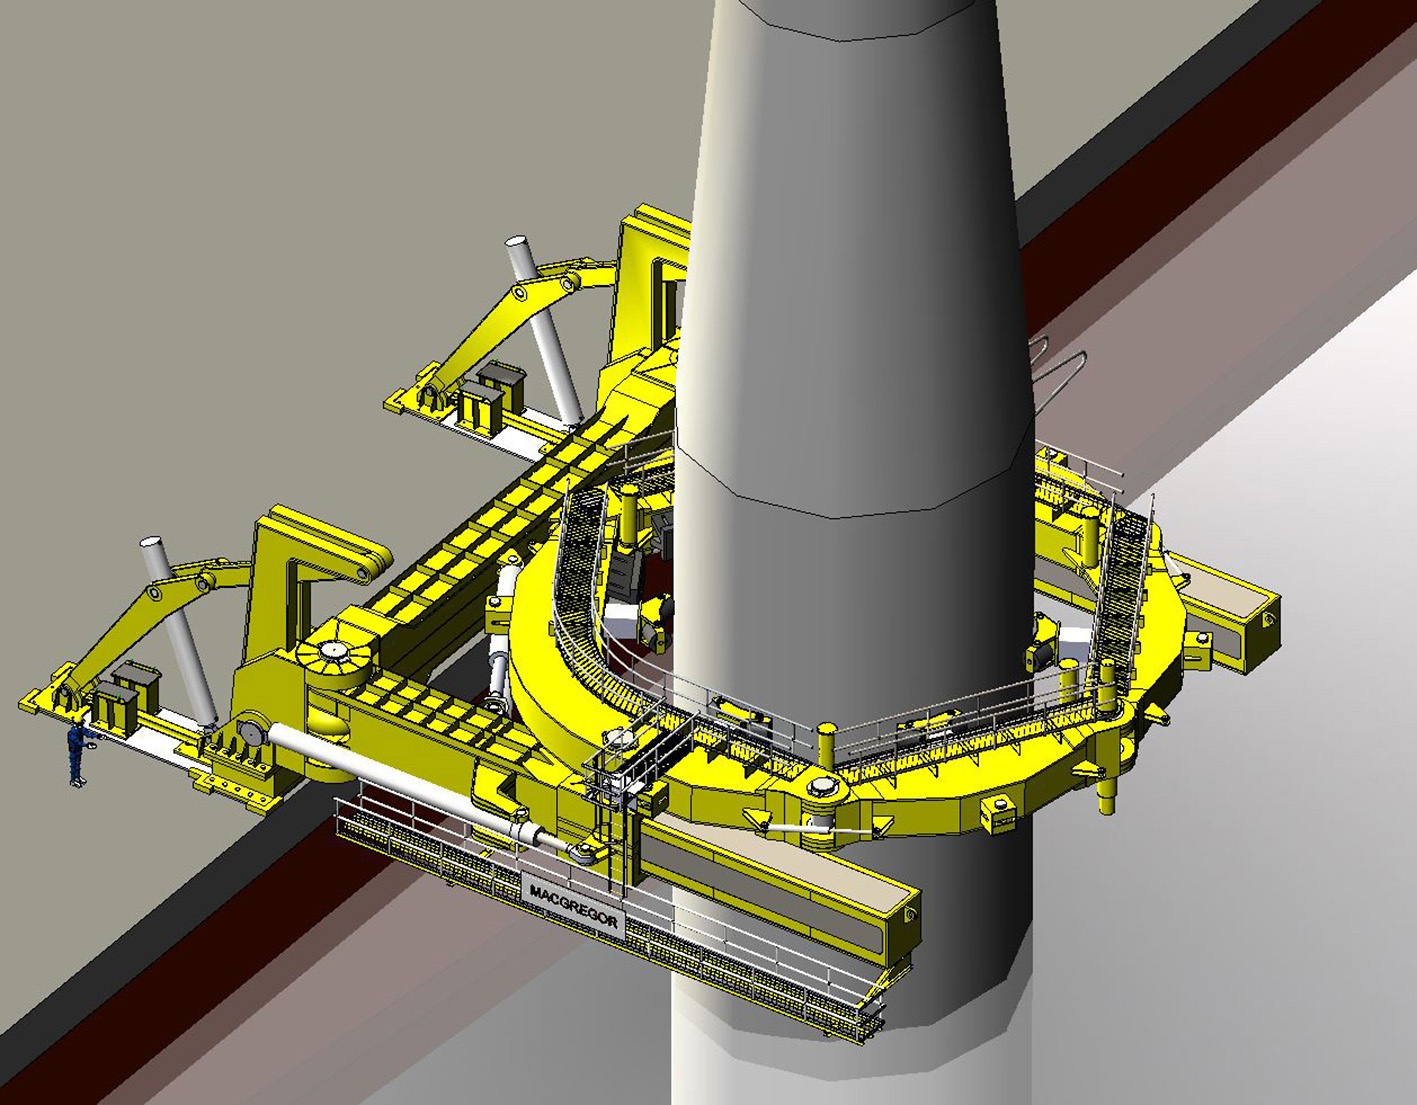 The new pile-gripper offers substantial cost and time savings by applying motion-compensation technology, coupled with dynamic positioning (DP), to the monopile installation process